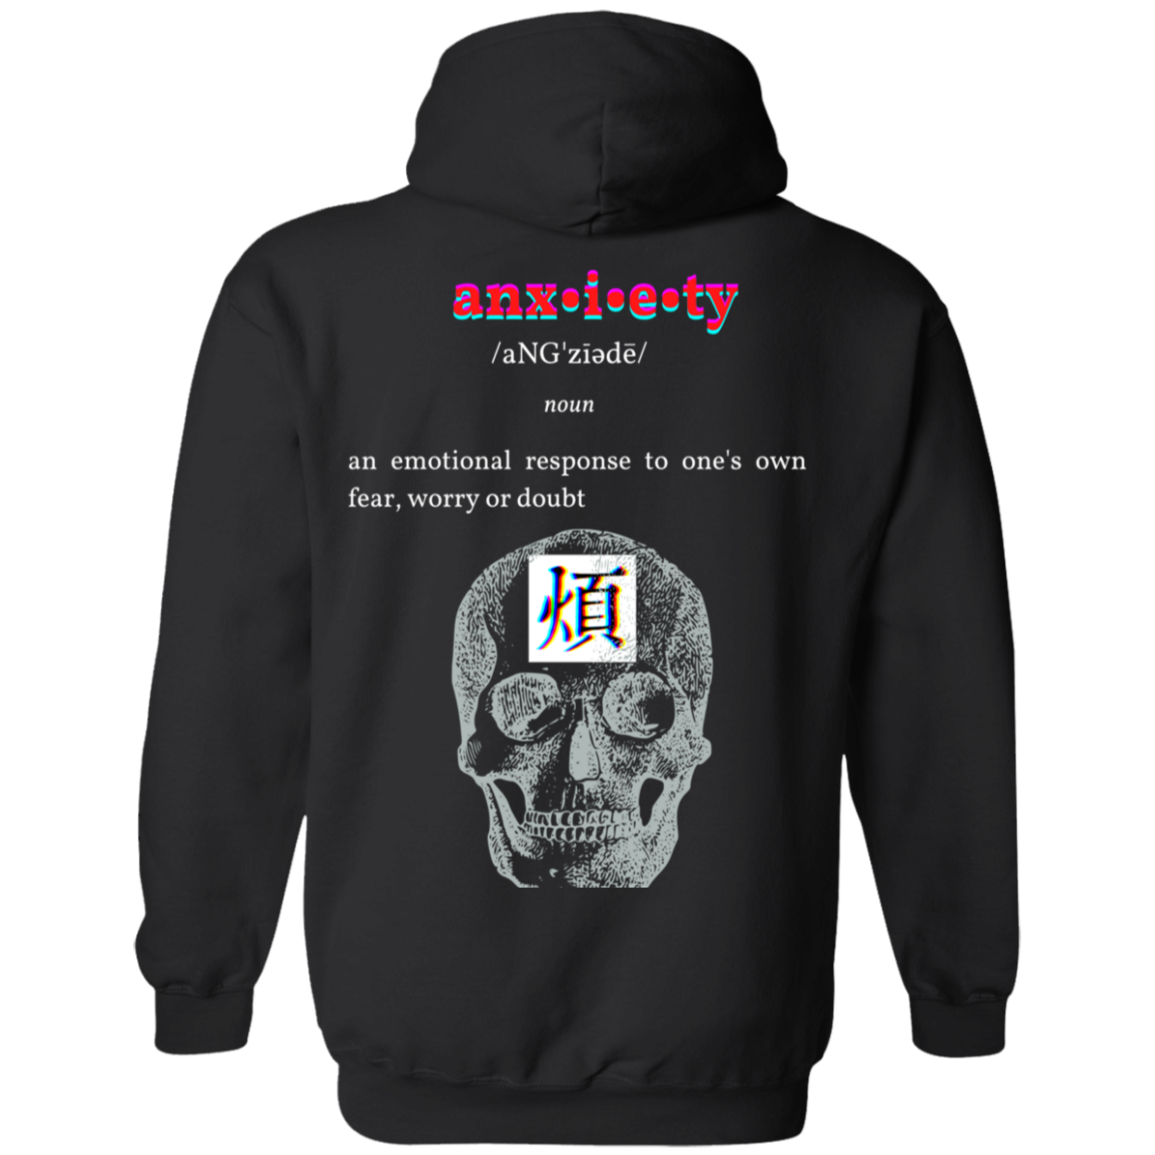 (back) the text, from top to bottom reads: anx•i•e•ty /aNG'ziadè/ noun an emotional response to one's own fear, worry or doubt. below the text, there's a skull with the kanji for anxiety in japanese in the center of it.